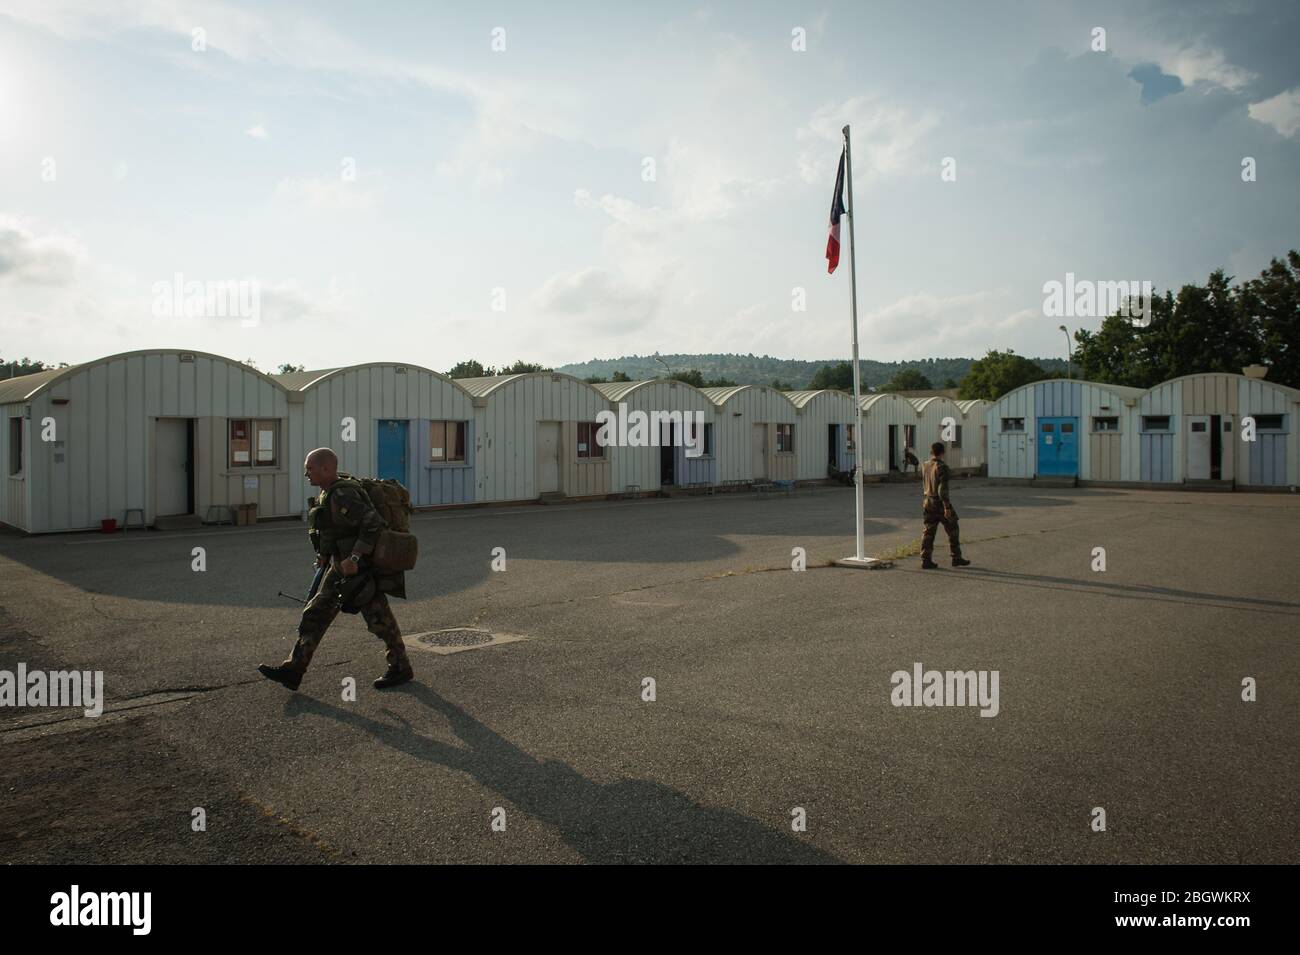 DRAGUIGNAN, FRANCE - JULY 20: soldiers walking in a camp with a french flag during the preparation in the Canjuers camp of French soldiers leaving for Stock Photo